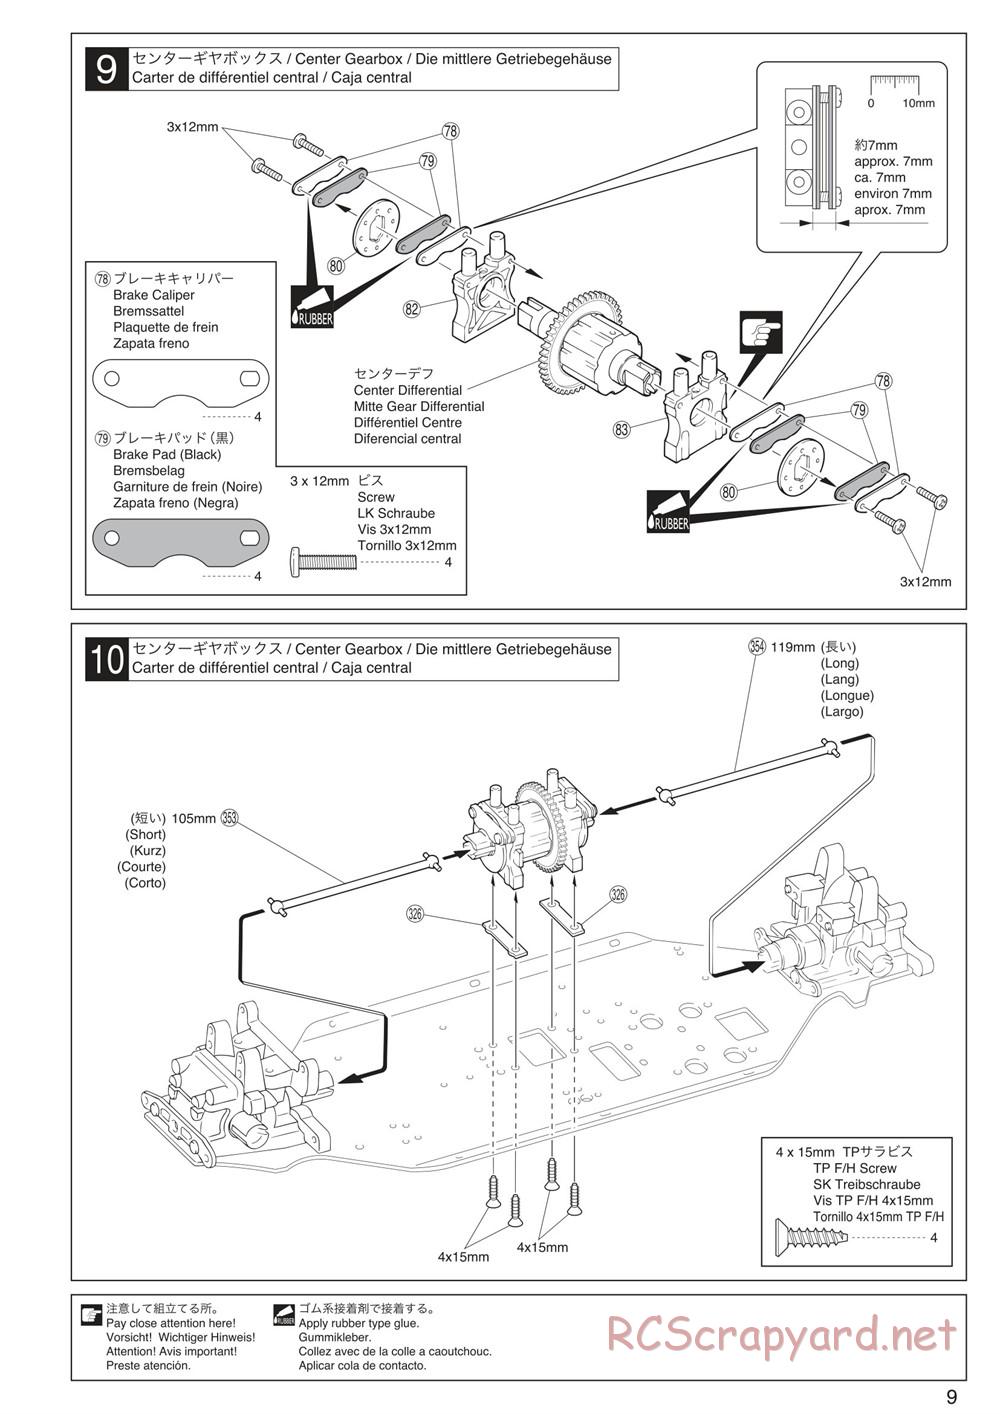 Kyosho - Inferno Neo ST 3.0 - Manual - Page 9